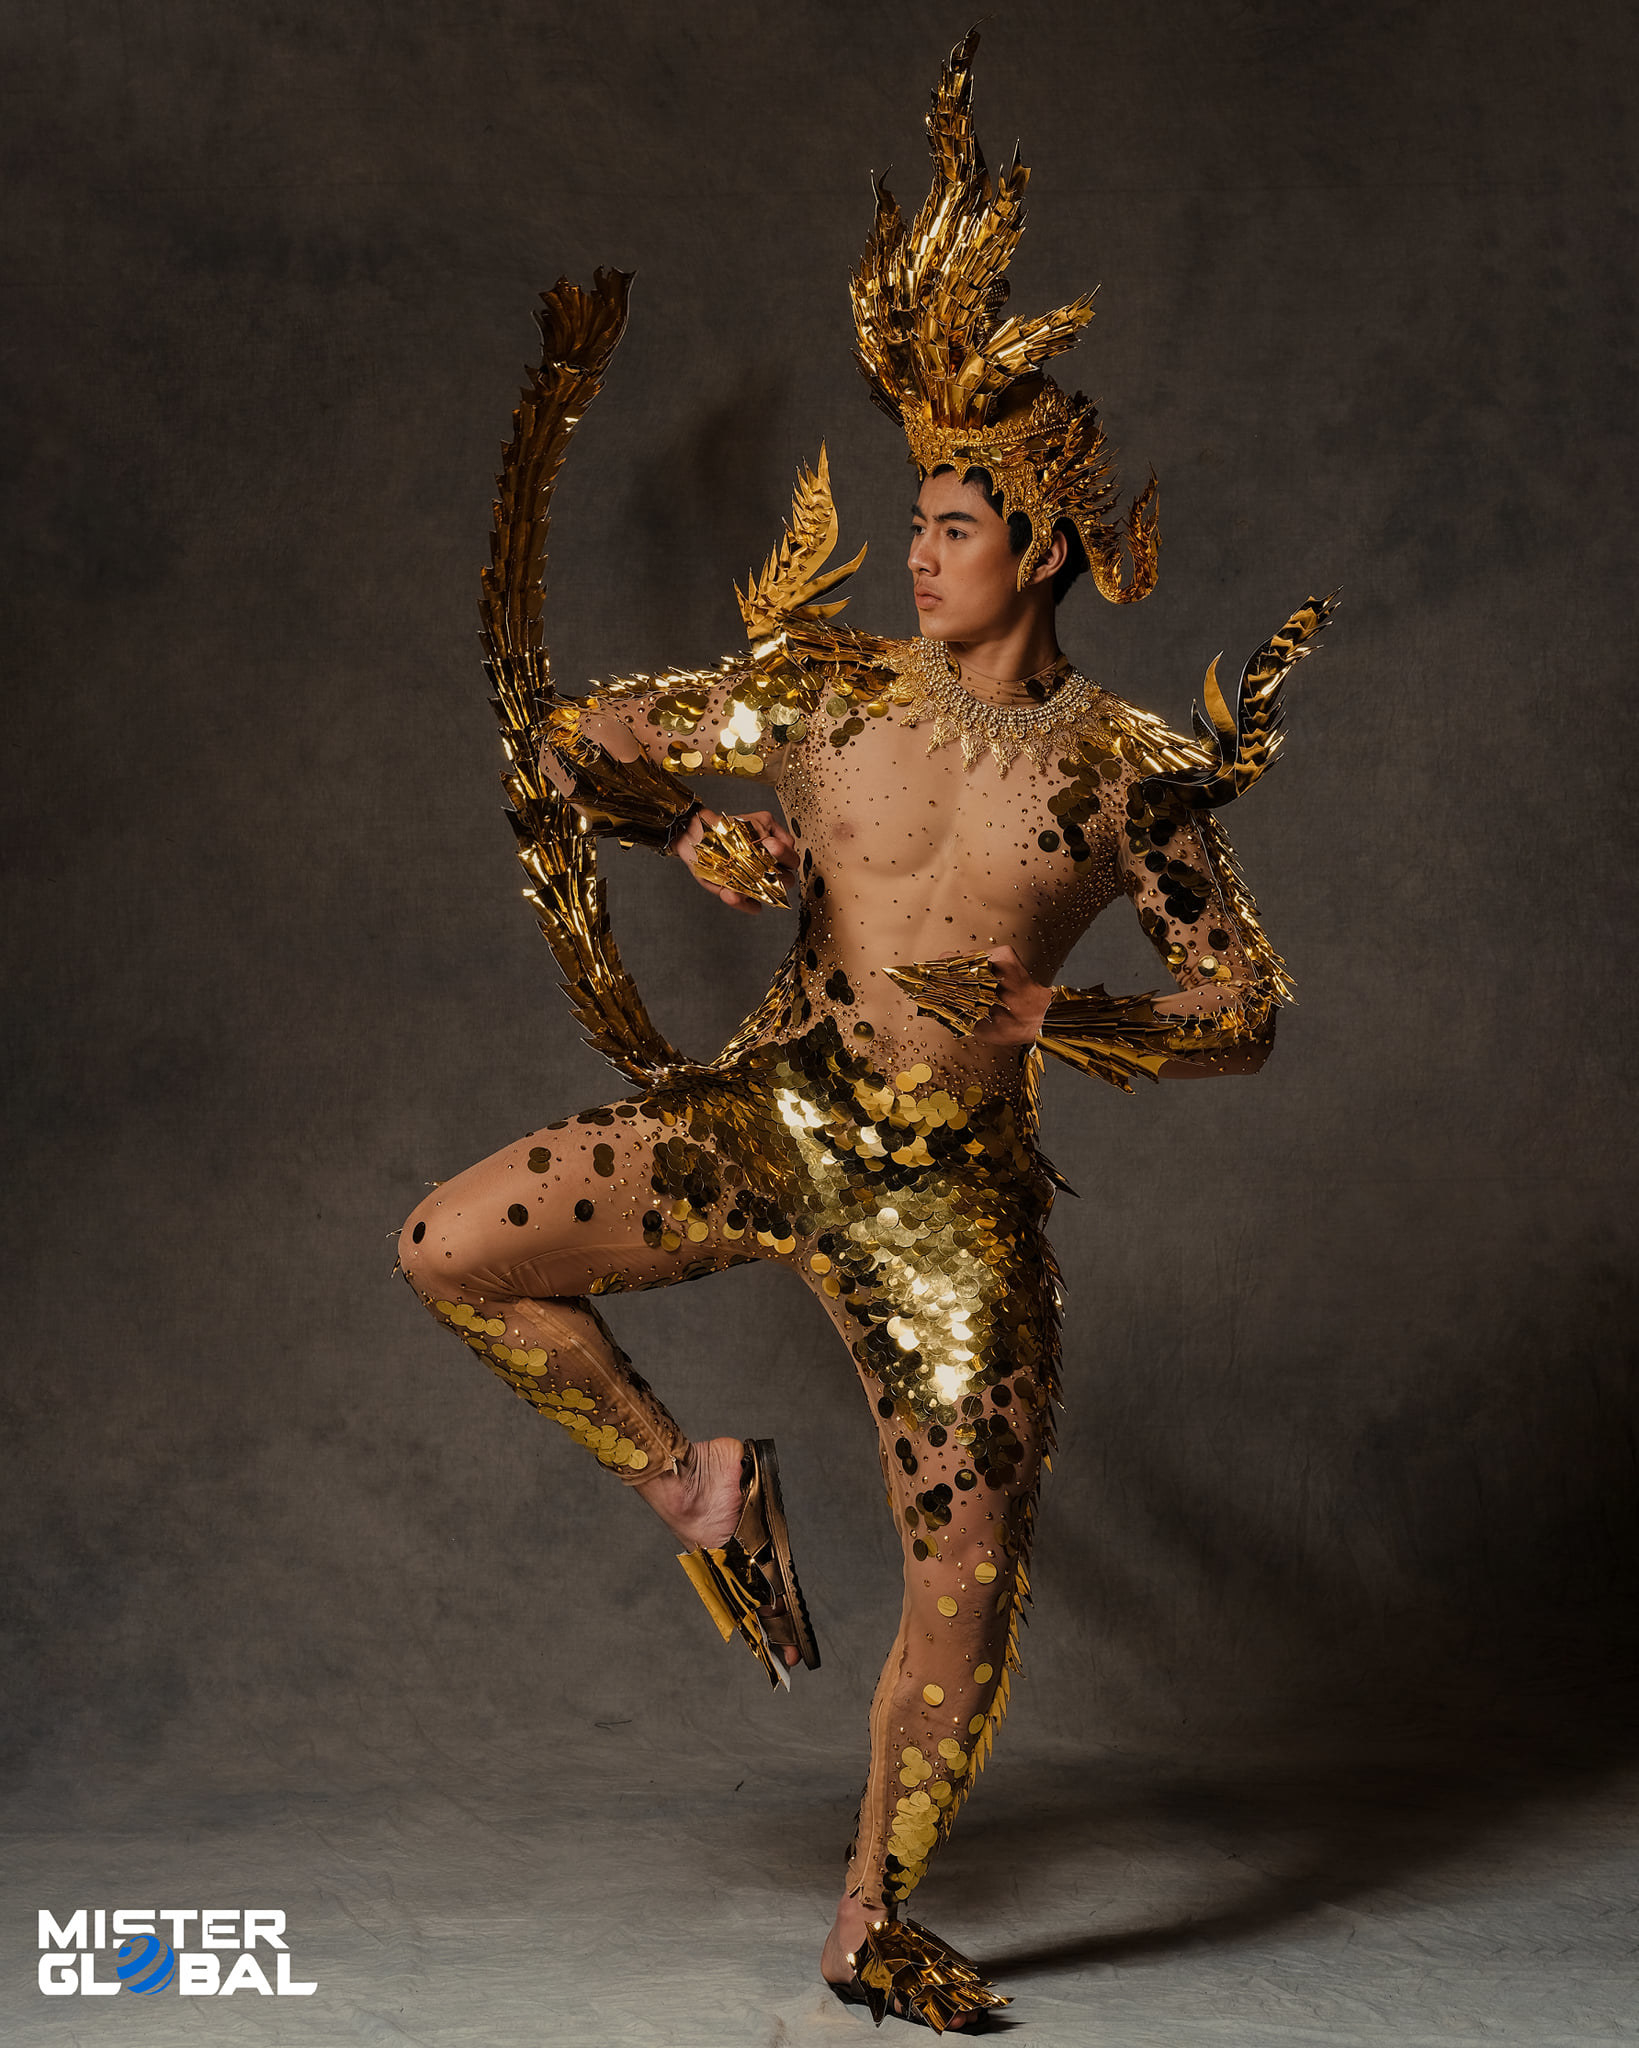 Man balanced on one leg and wearing an ornate headdress and tight, bare-chested bodysuit with metallic-looking sequins